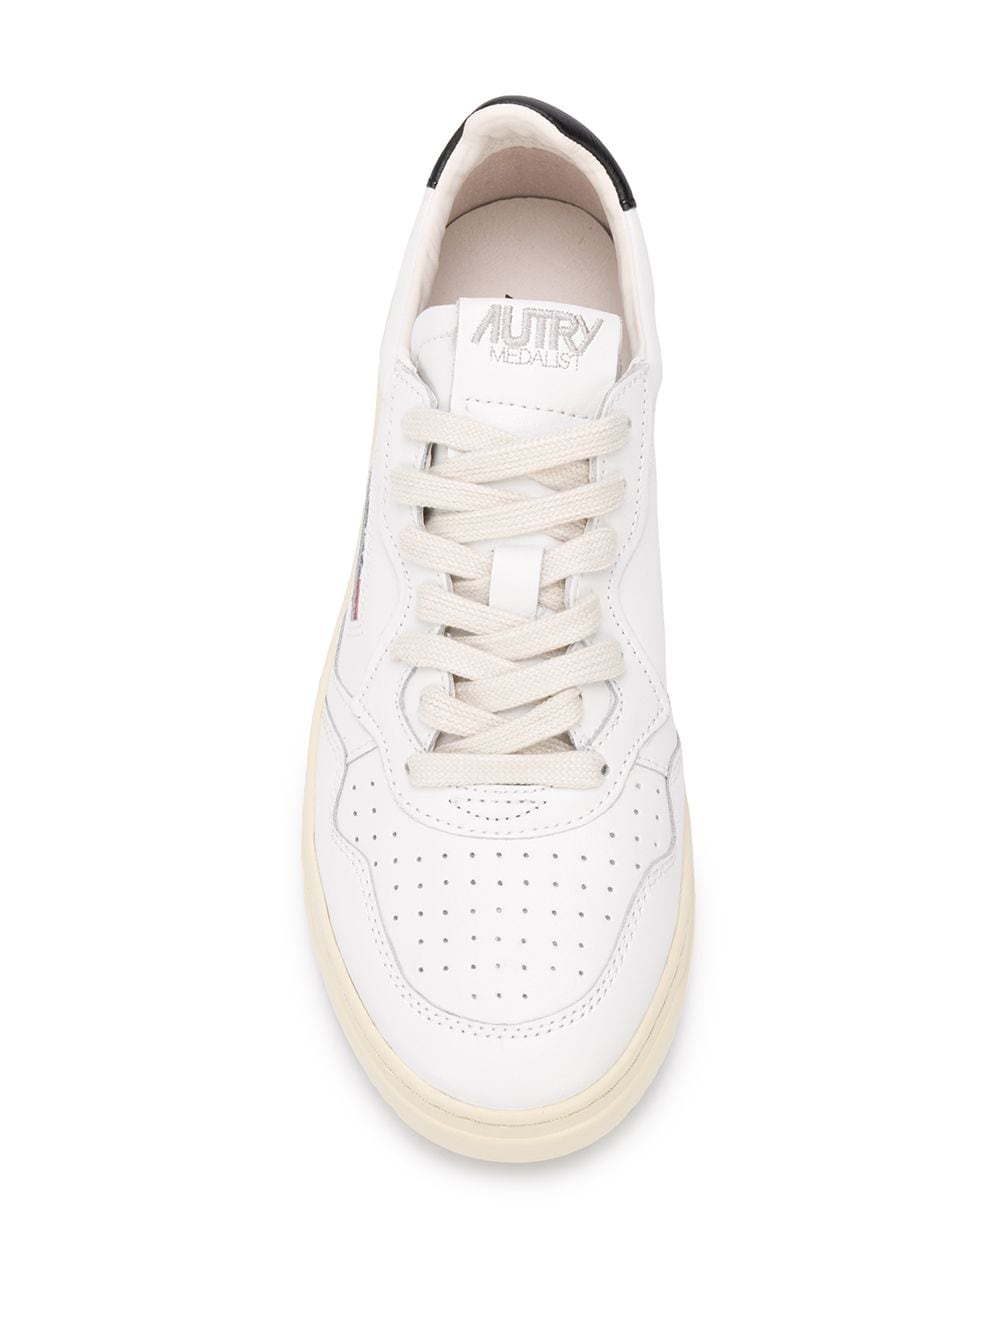 White/multicolour leather Medalist low-top sneakers